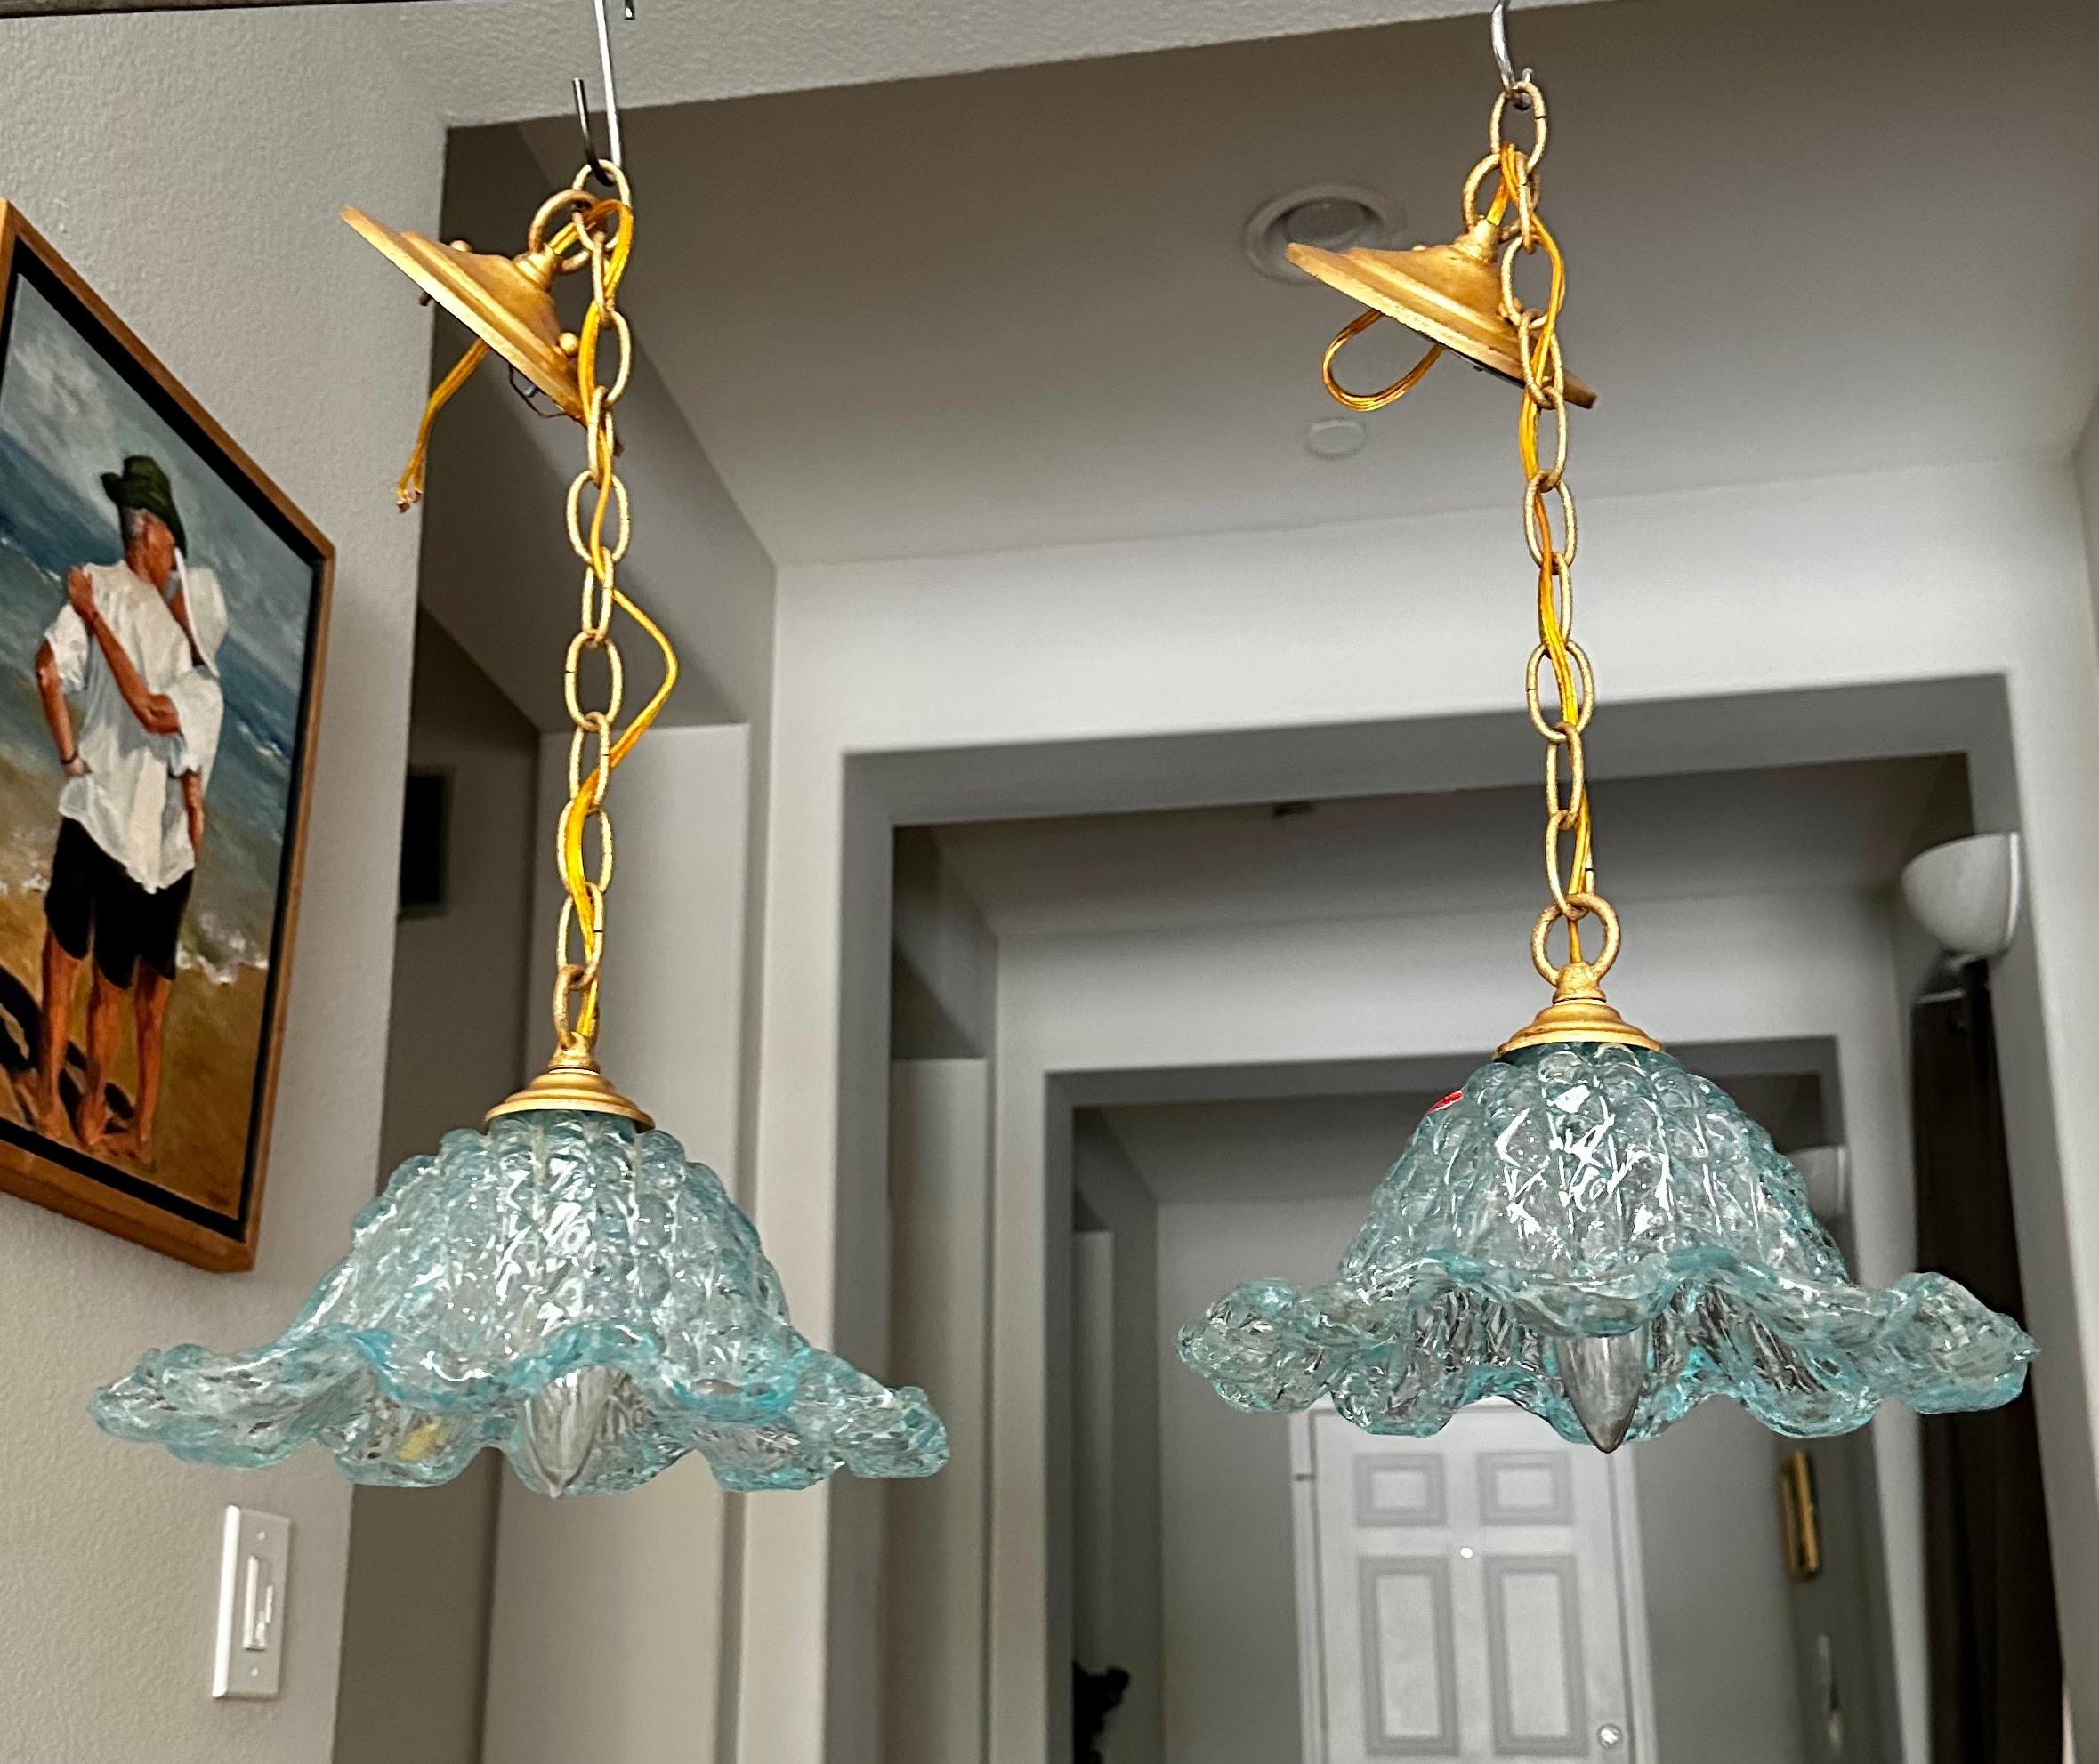 Pair Italian murano smaller scale tulip shape hand blown blue teal glass ceiling light pendants. The metal hardware is gilt finish including chain and ceiling cap —see close ups for how finish looks. 
Each fixture uses single candelabra size E12